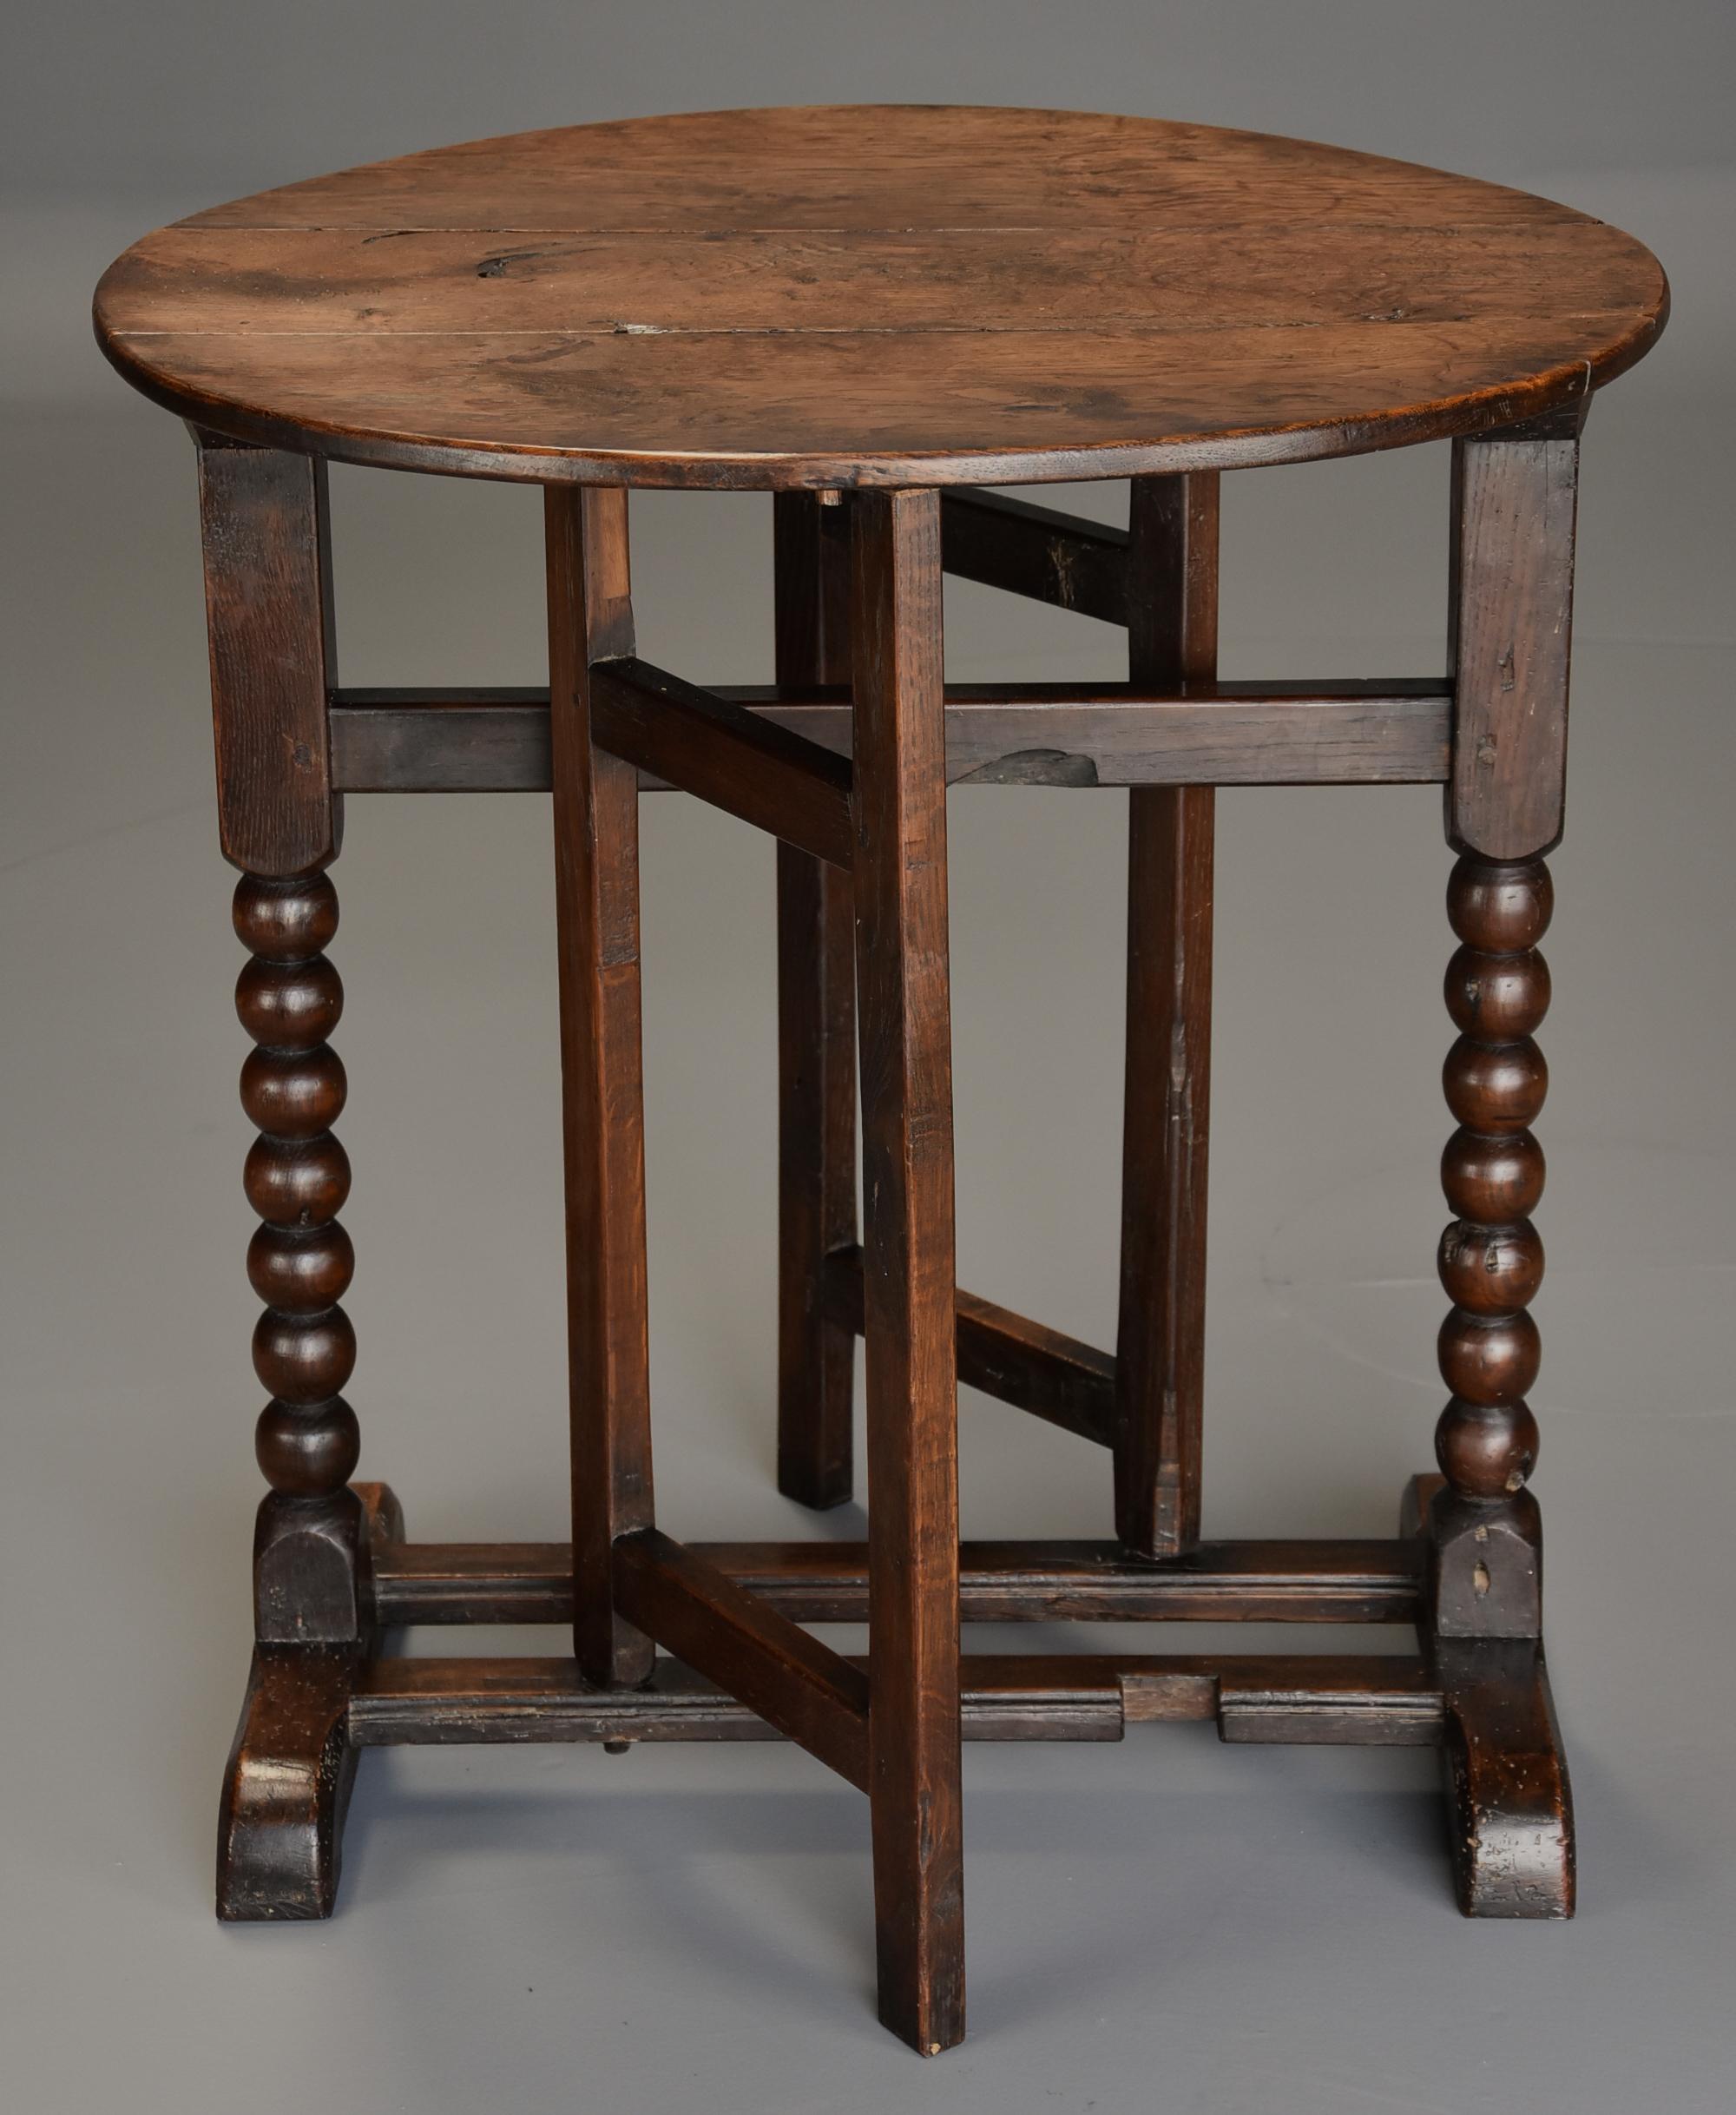 English Extremely Rare Late 17th Century Oak Joined Gateleg Table of Small Proportions For Sale